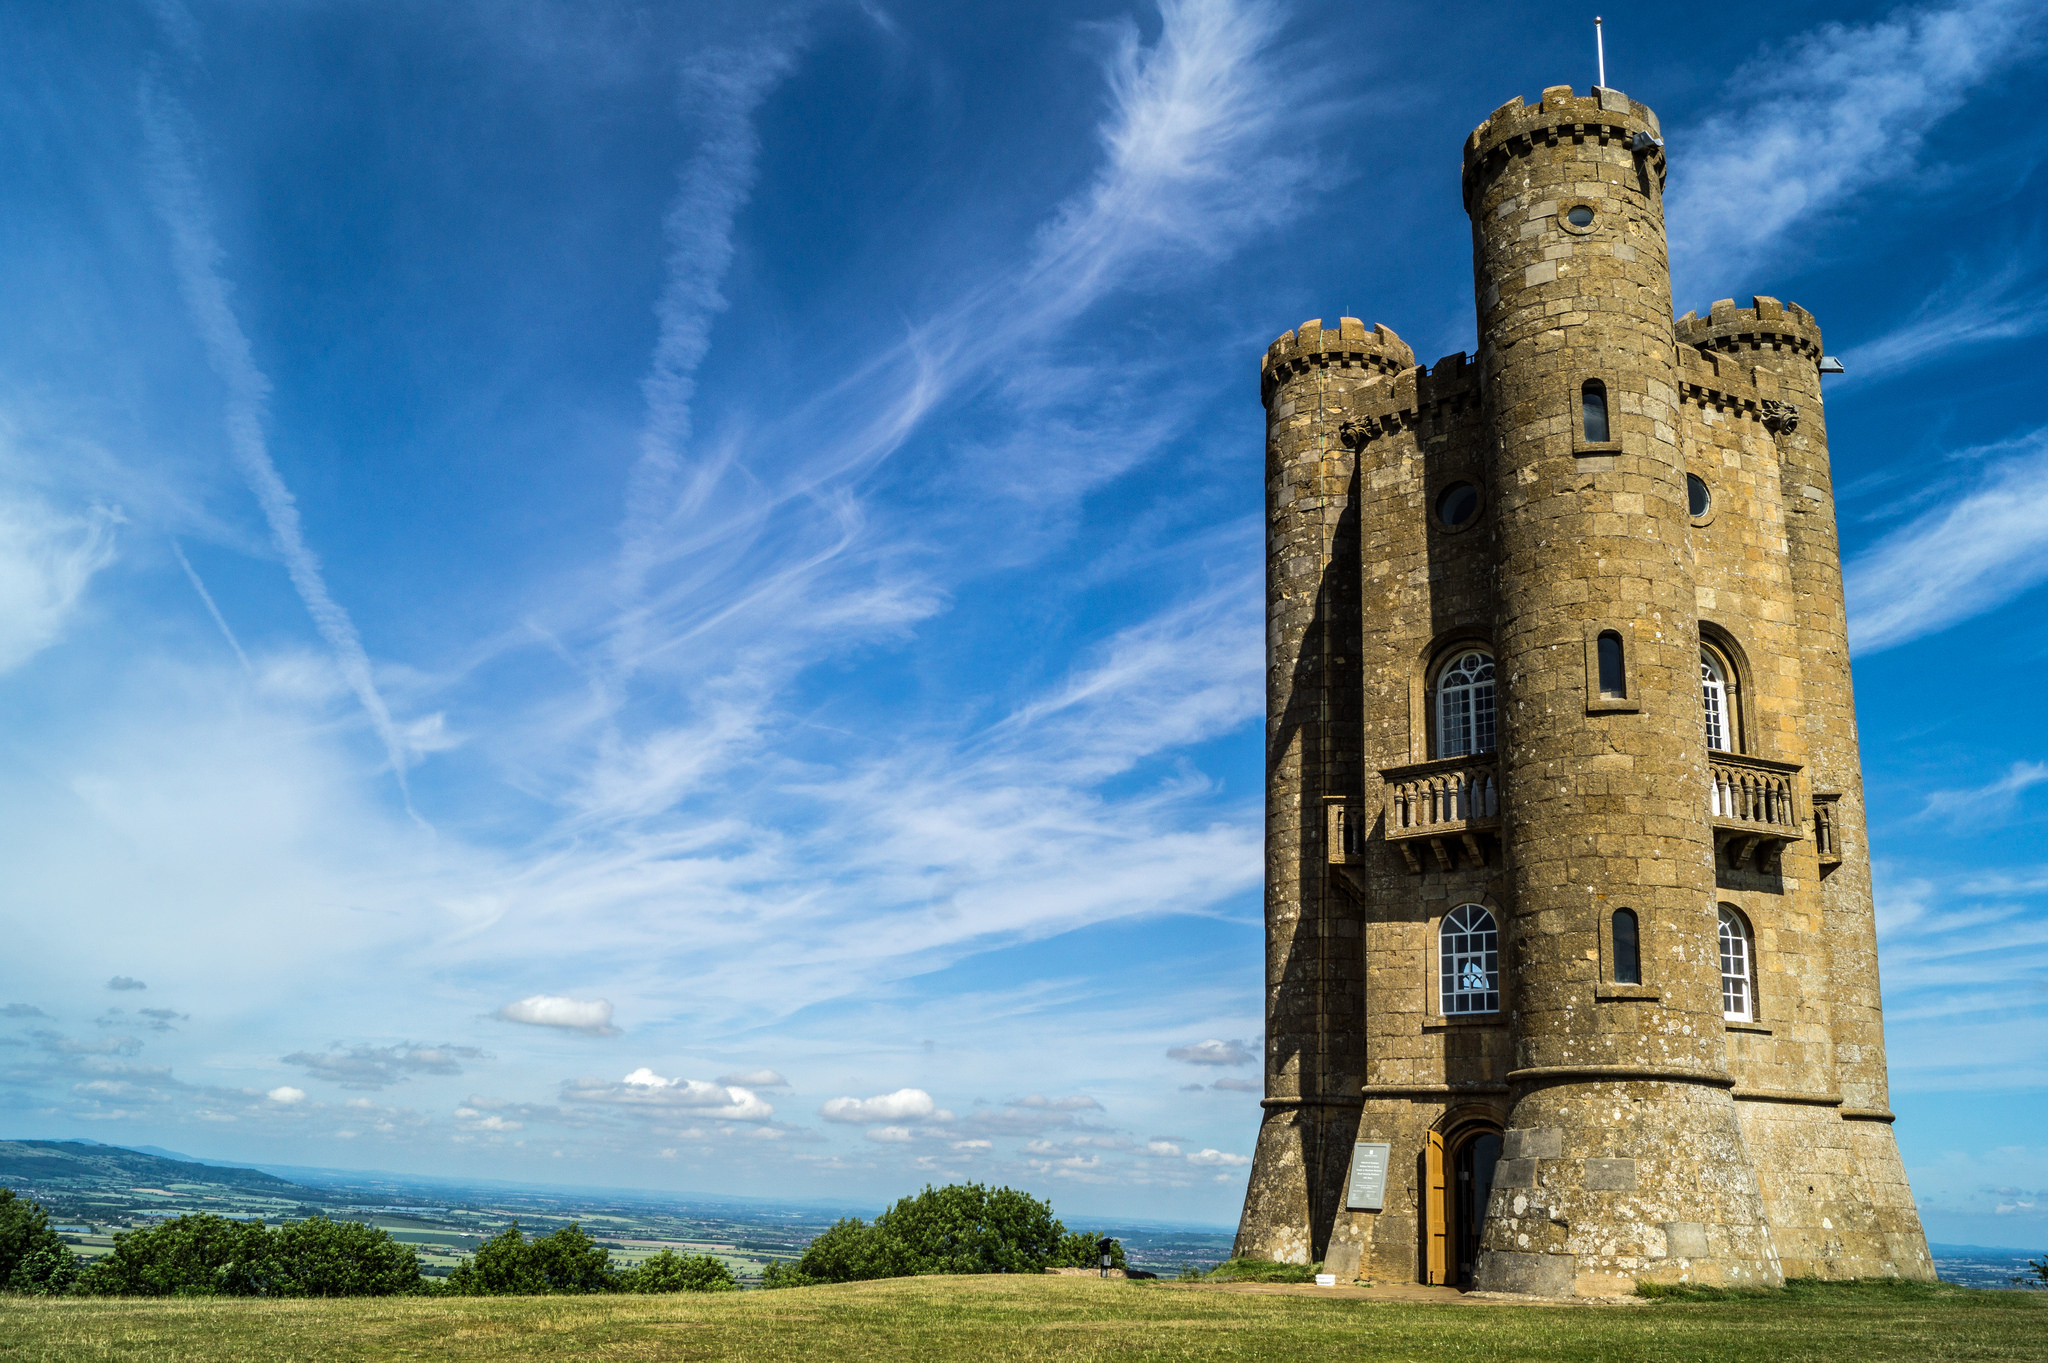 Broadway Tower, Worcestershire #19